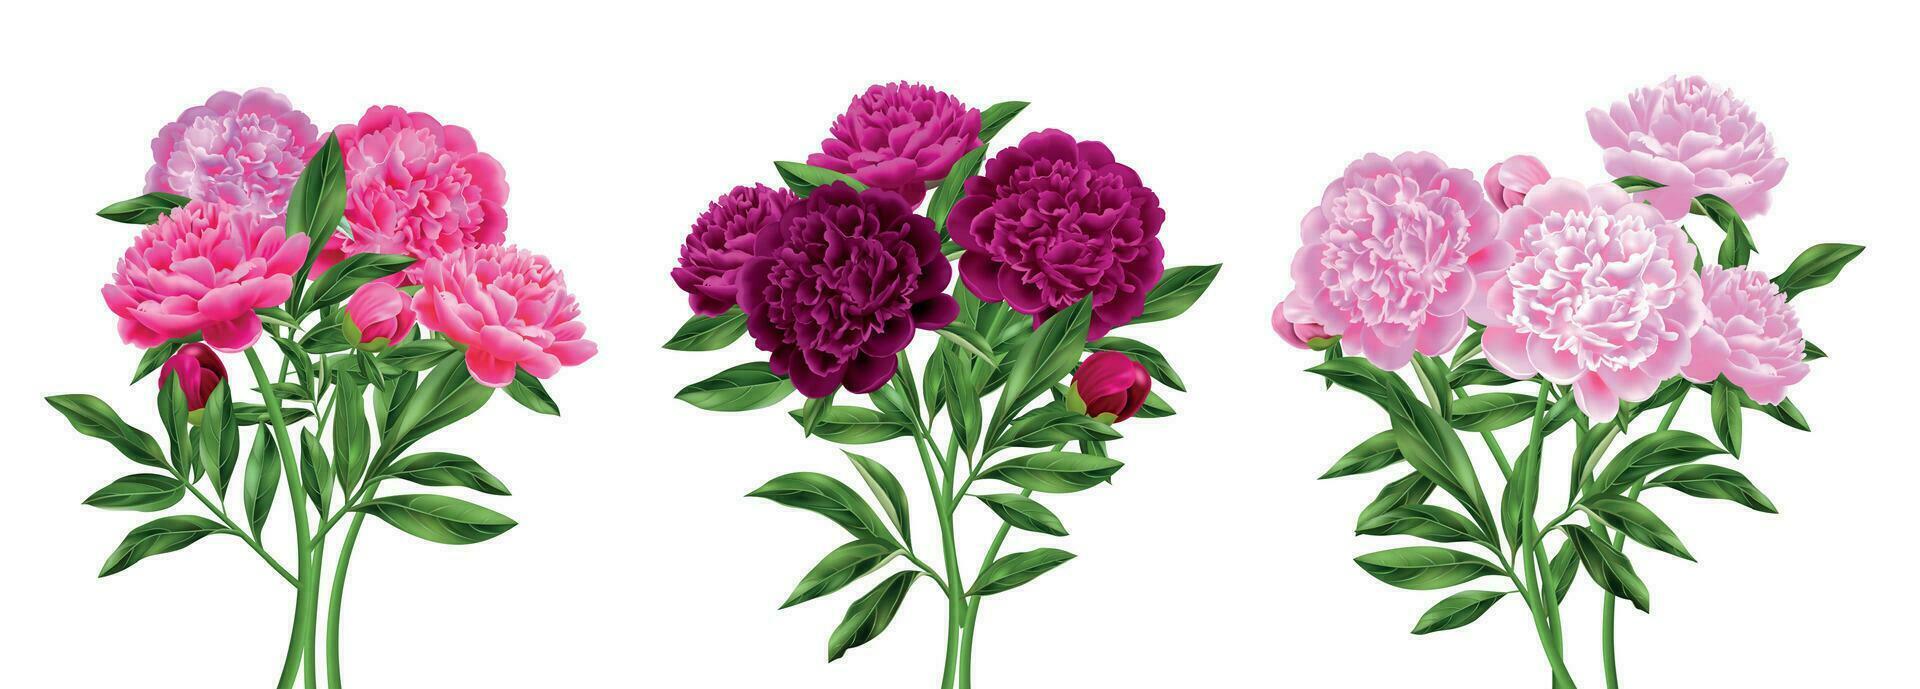 Realistic Peony Compositions vector